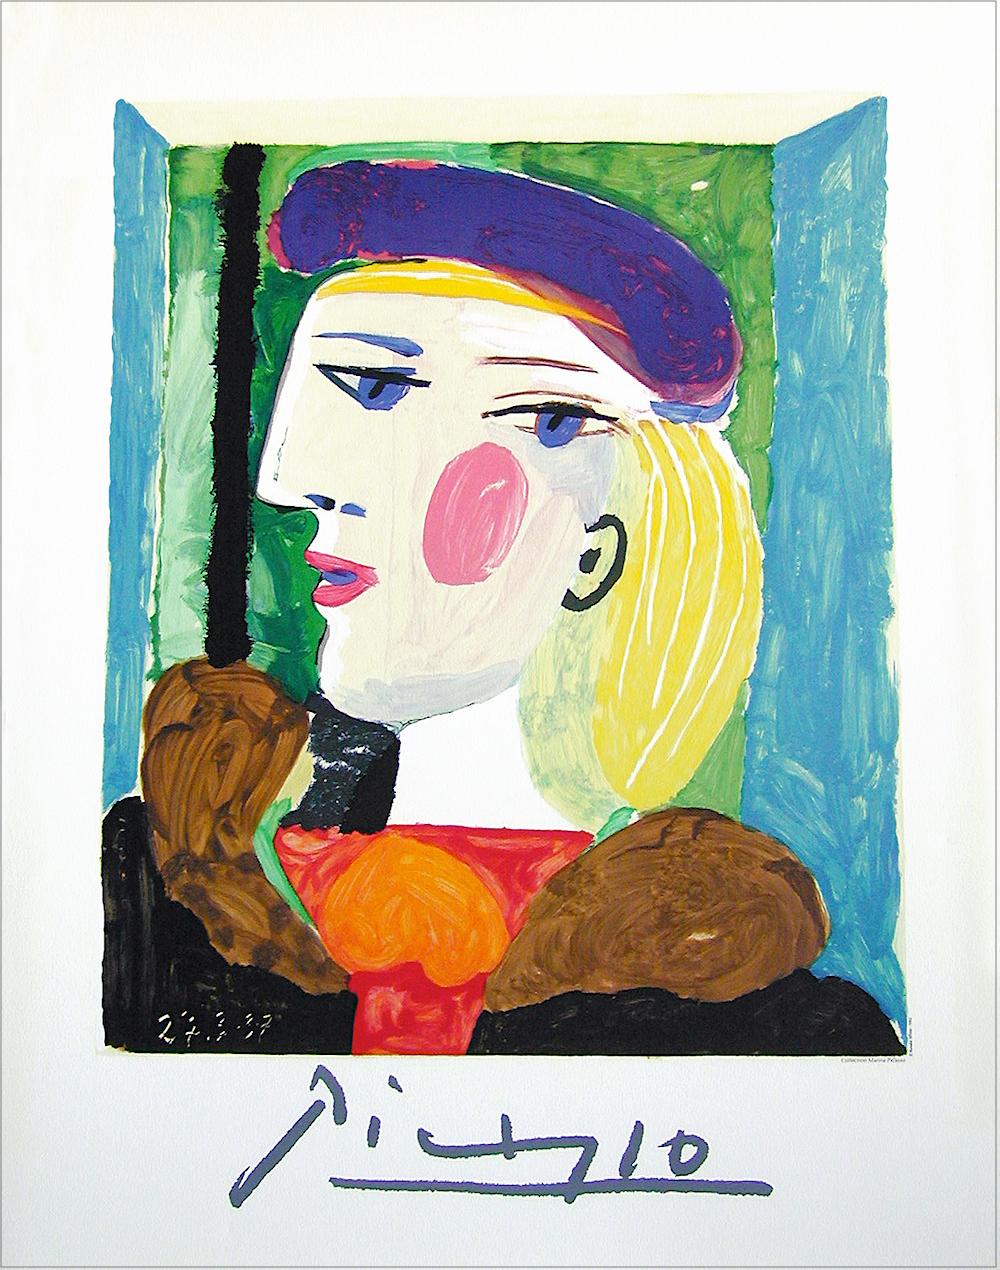 (after) Pablo Picasso Abstract Print - FEMME PROFILE(Marie Therese Walter) Lithograph, Portrait Blonde Woman Blue Beret